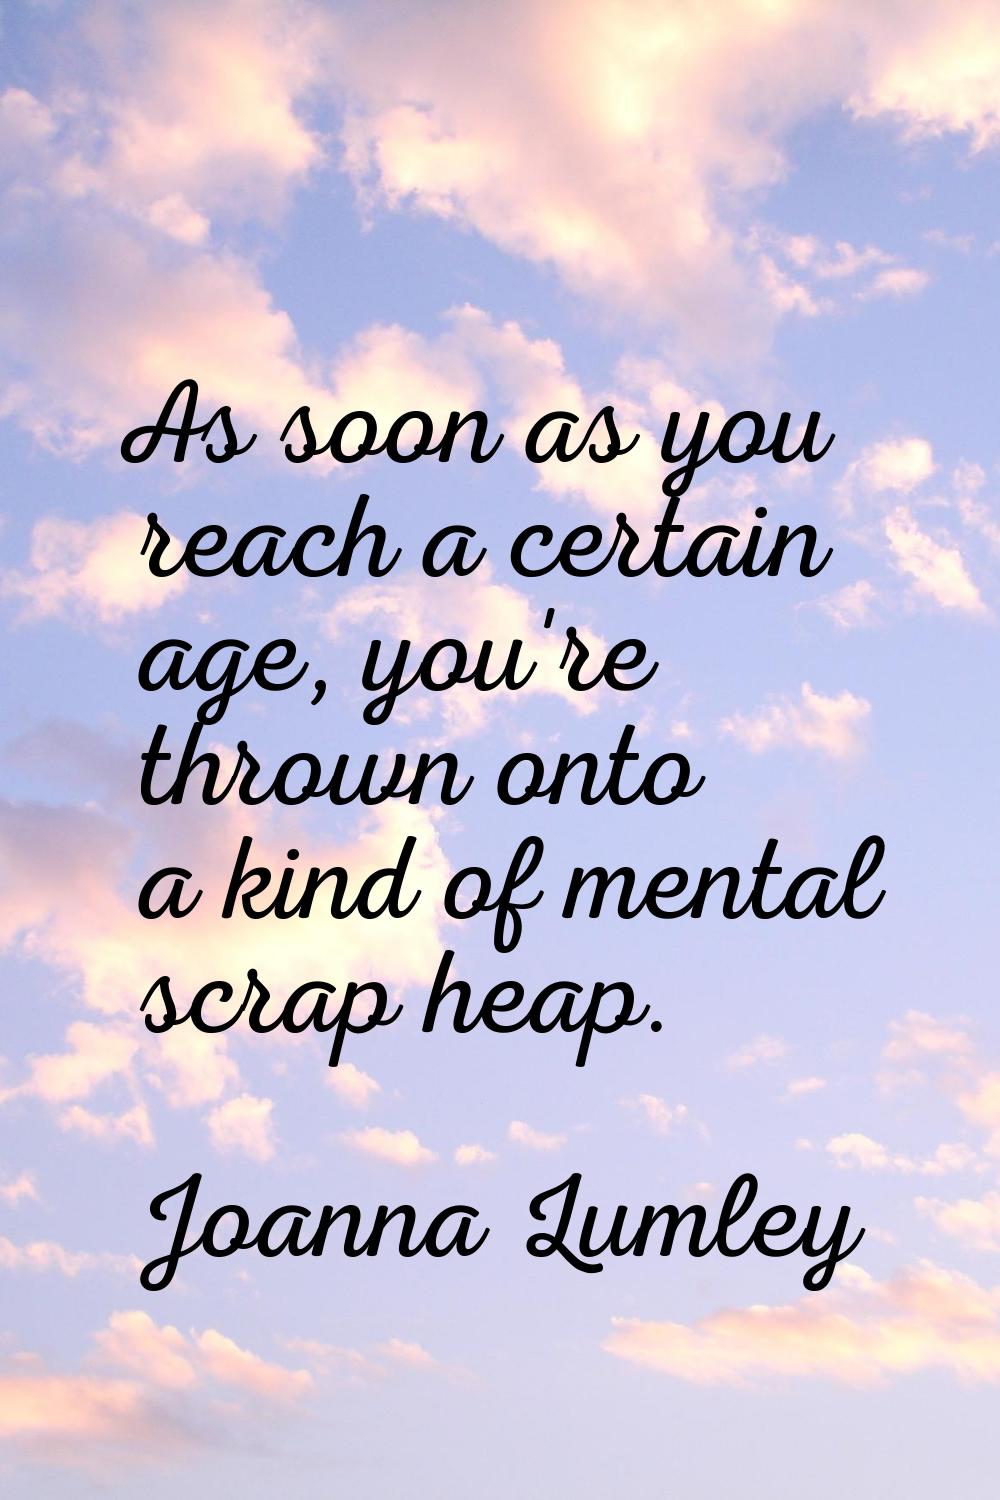 As soon as you reach a certain age, you're thrown onto a kind of mental scrap heap.